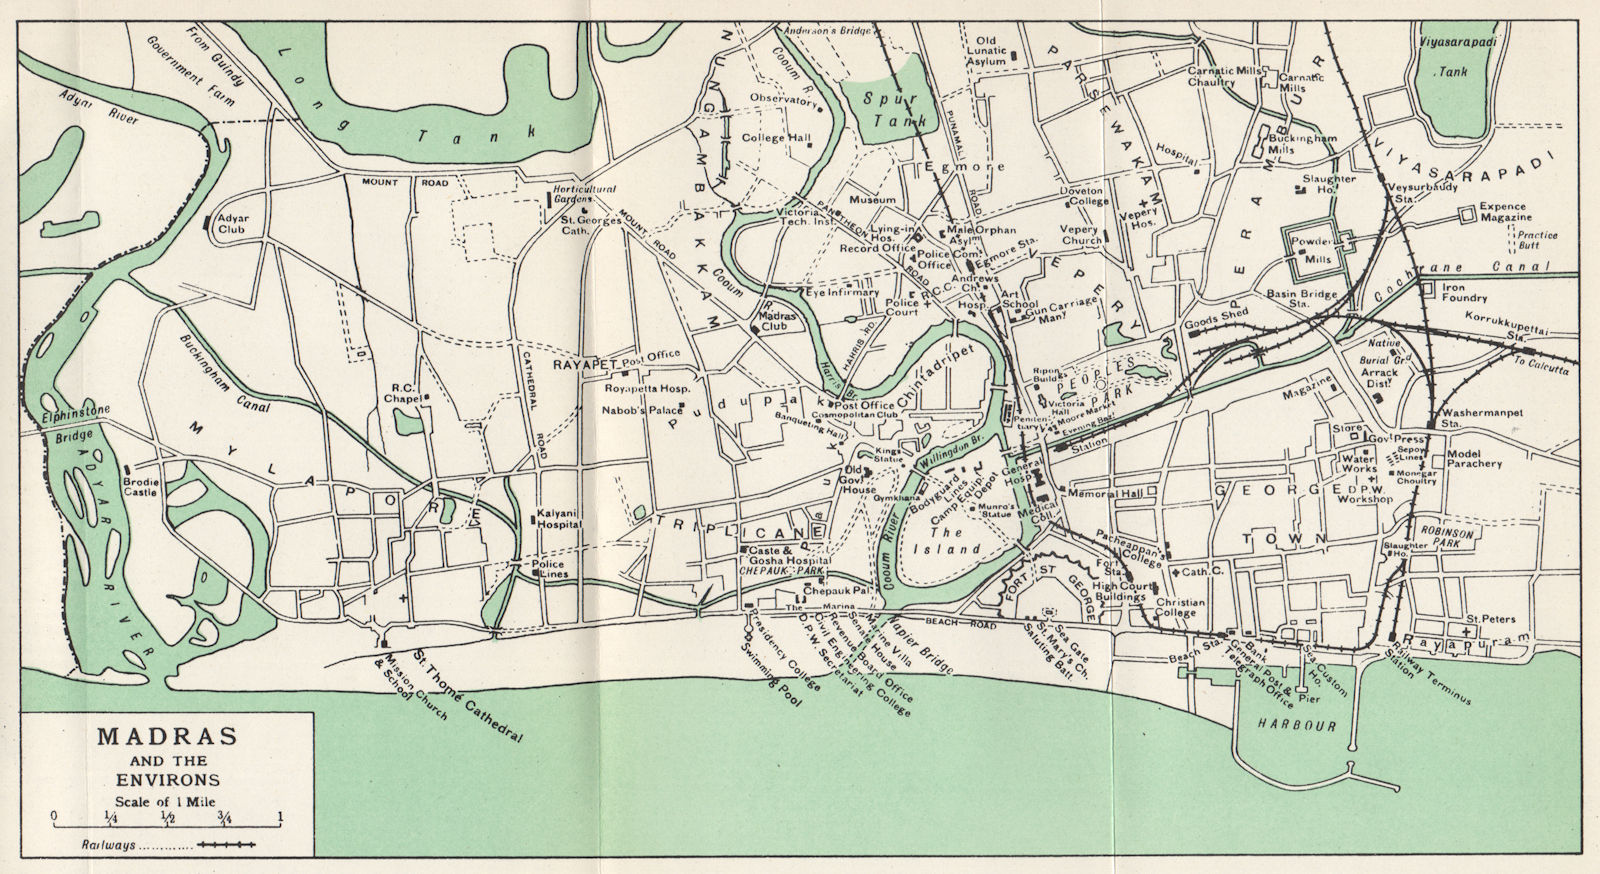 MADRAS/CHENNAI. Town city plan. Showing key buildings. India 1965 old map